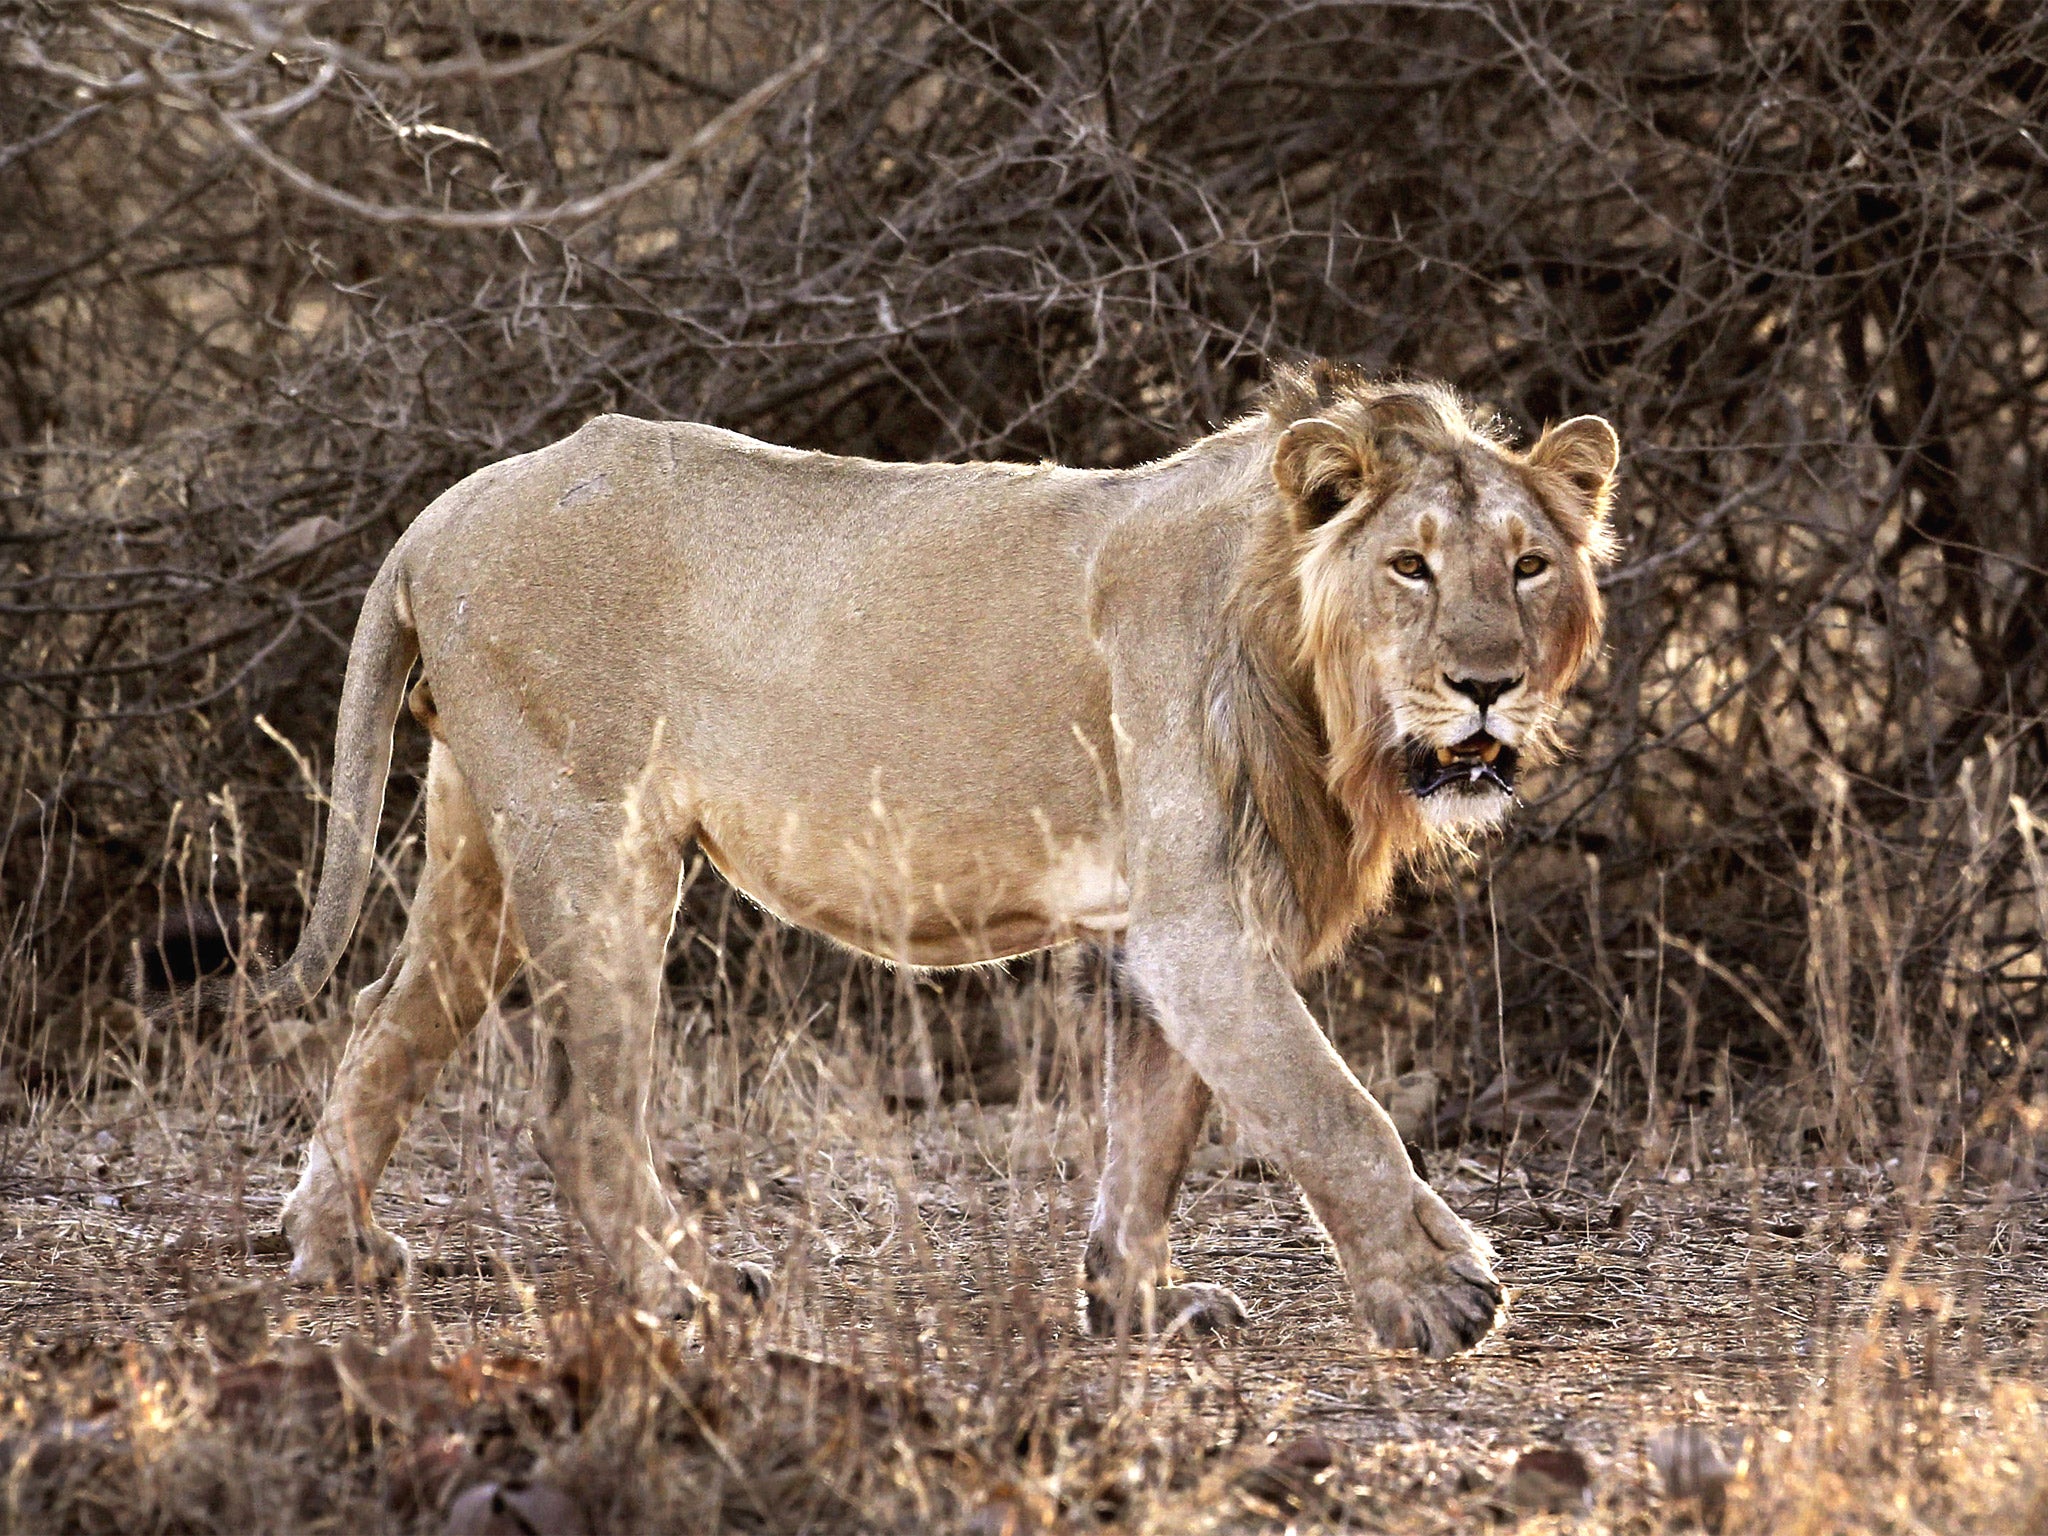 An Asiatic lion in Gujarat. The state’s breeding programme has raised their population from 50 to more than 400